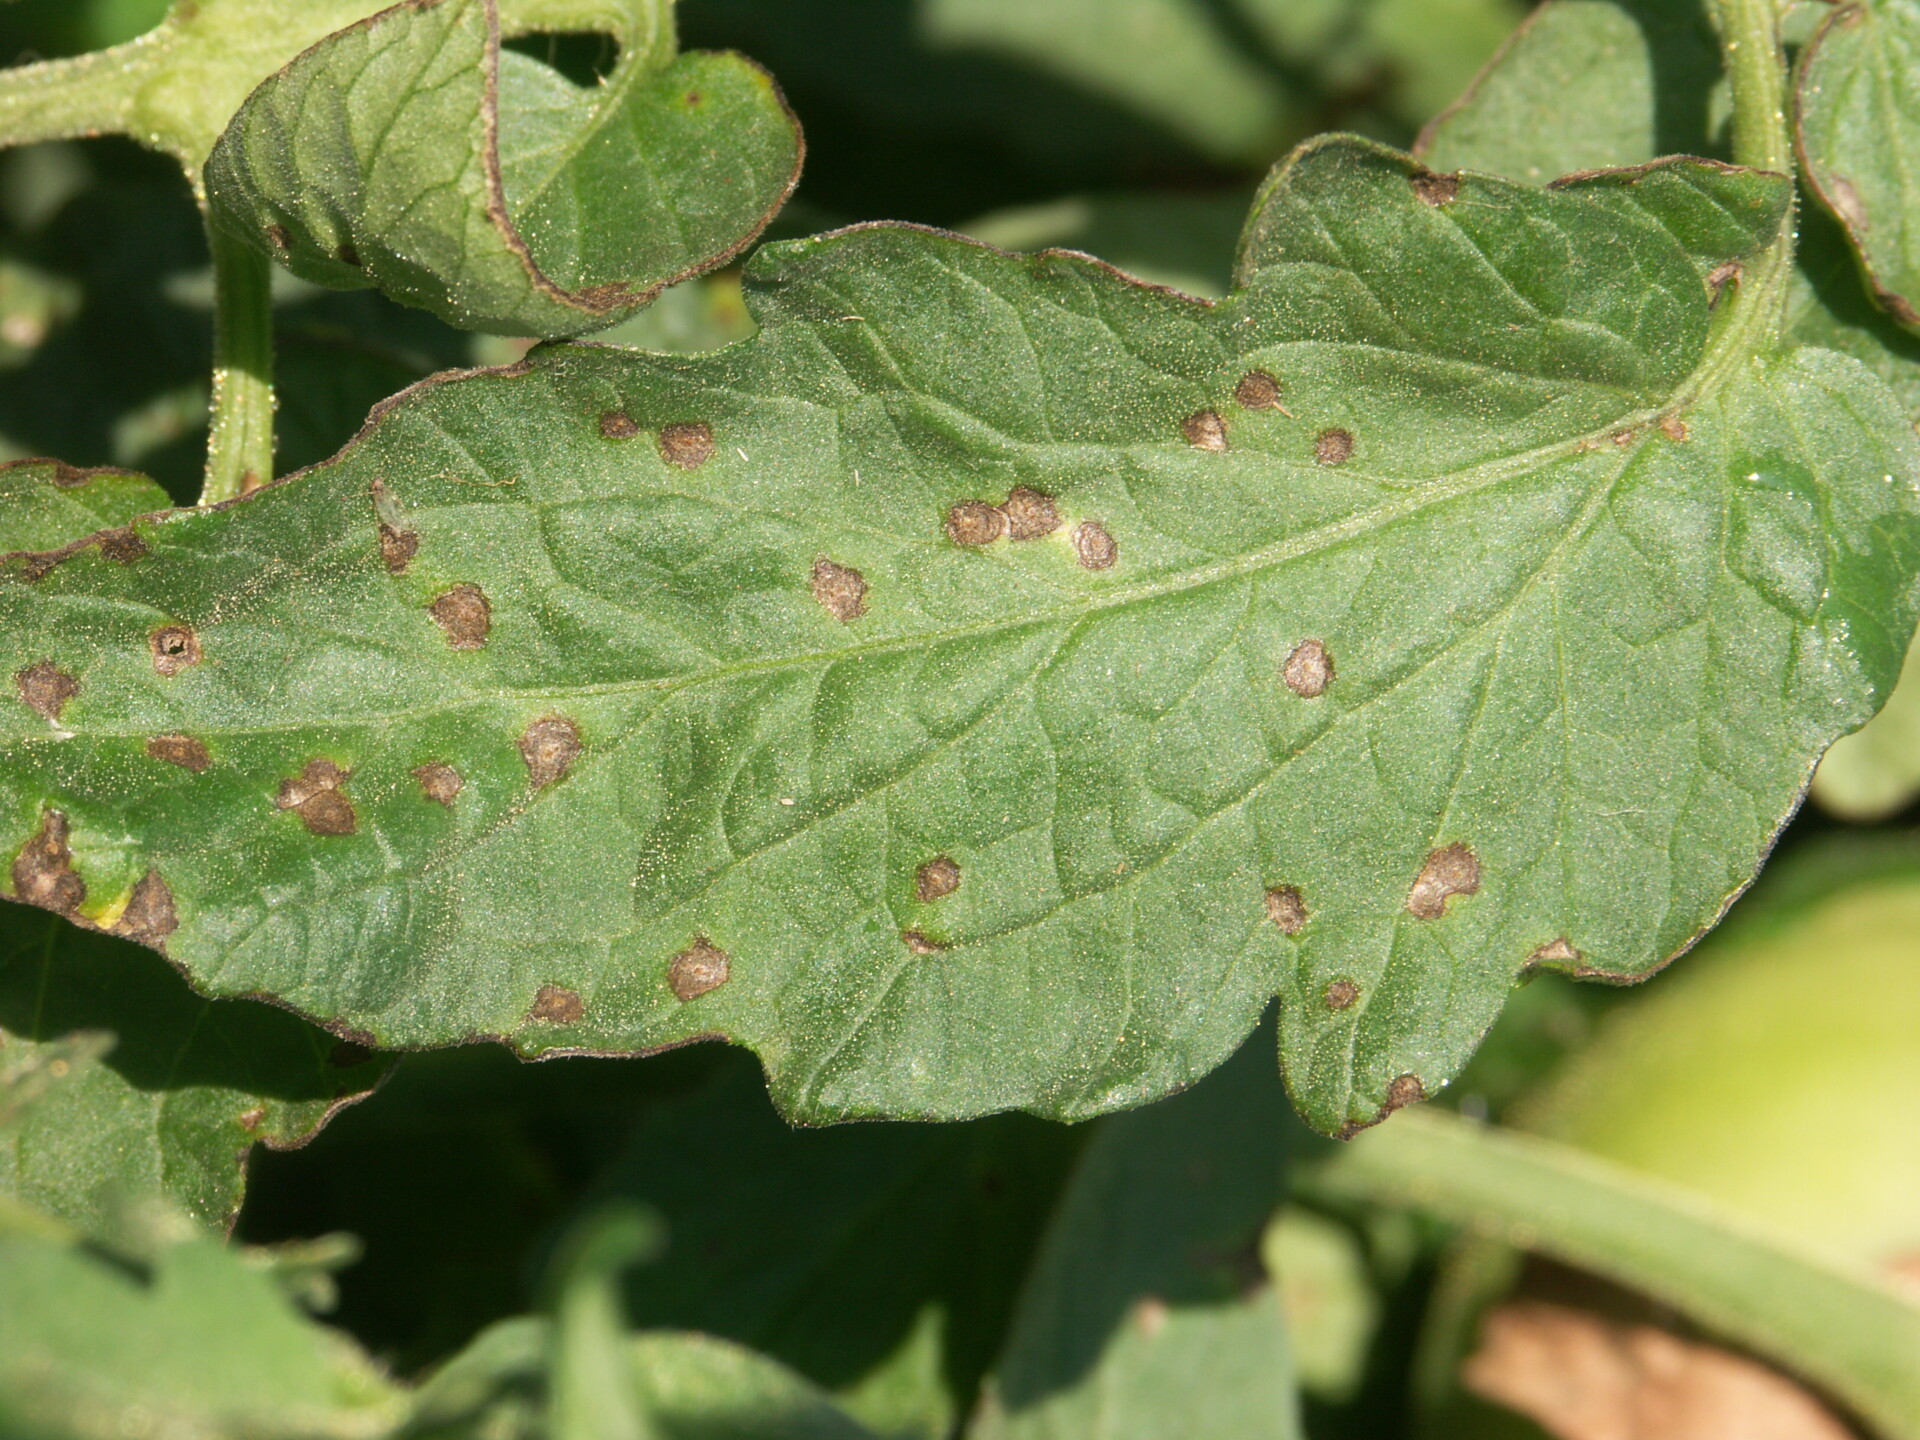 Note ring structure of early blight of tomato lesions.